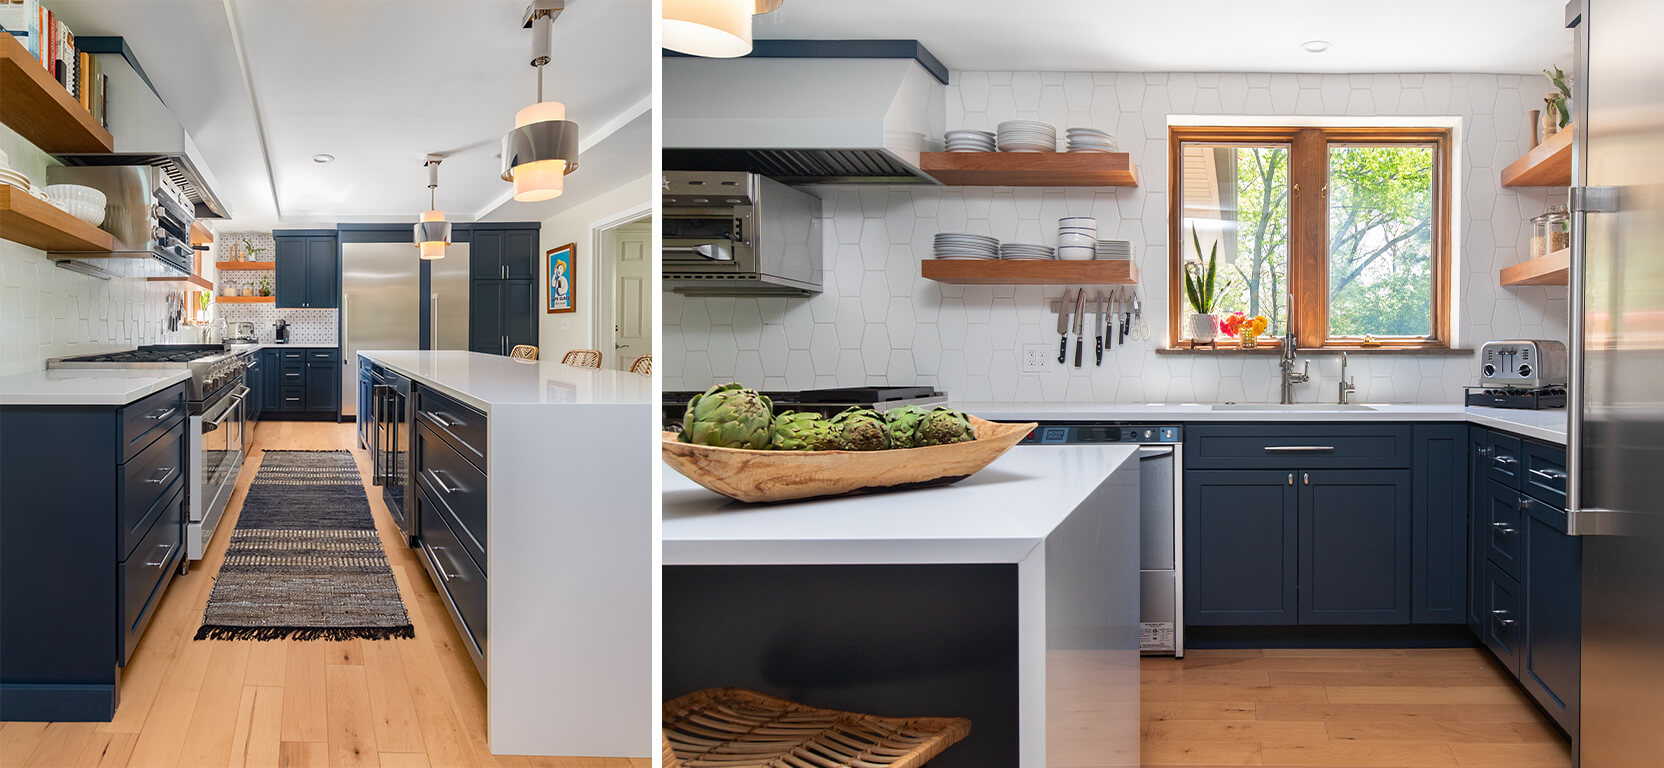 Modern kitchen with open wood shelving, modern stainless steel appliances and lighting, sleek white island, and dark blue cabinetry. Shot of sink area in navy and white modern kitchen with natural wood floor, trim, and shelving and modern appliances.